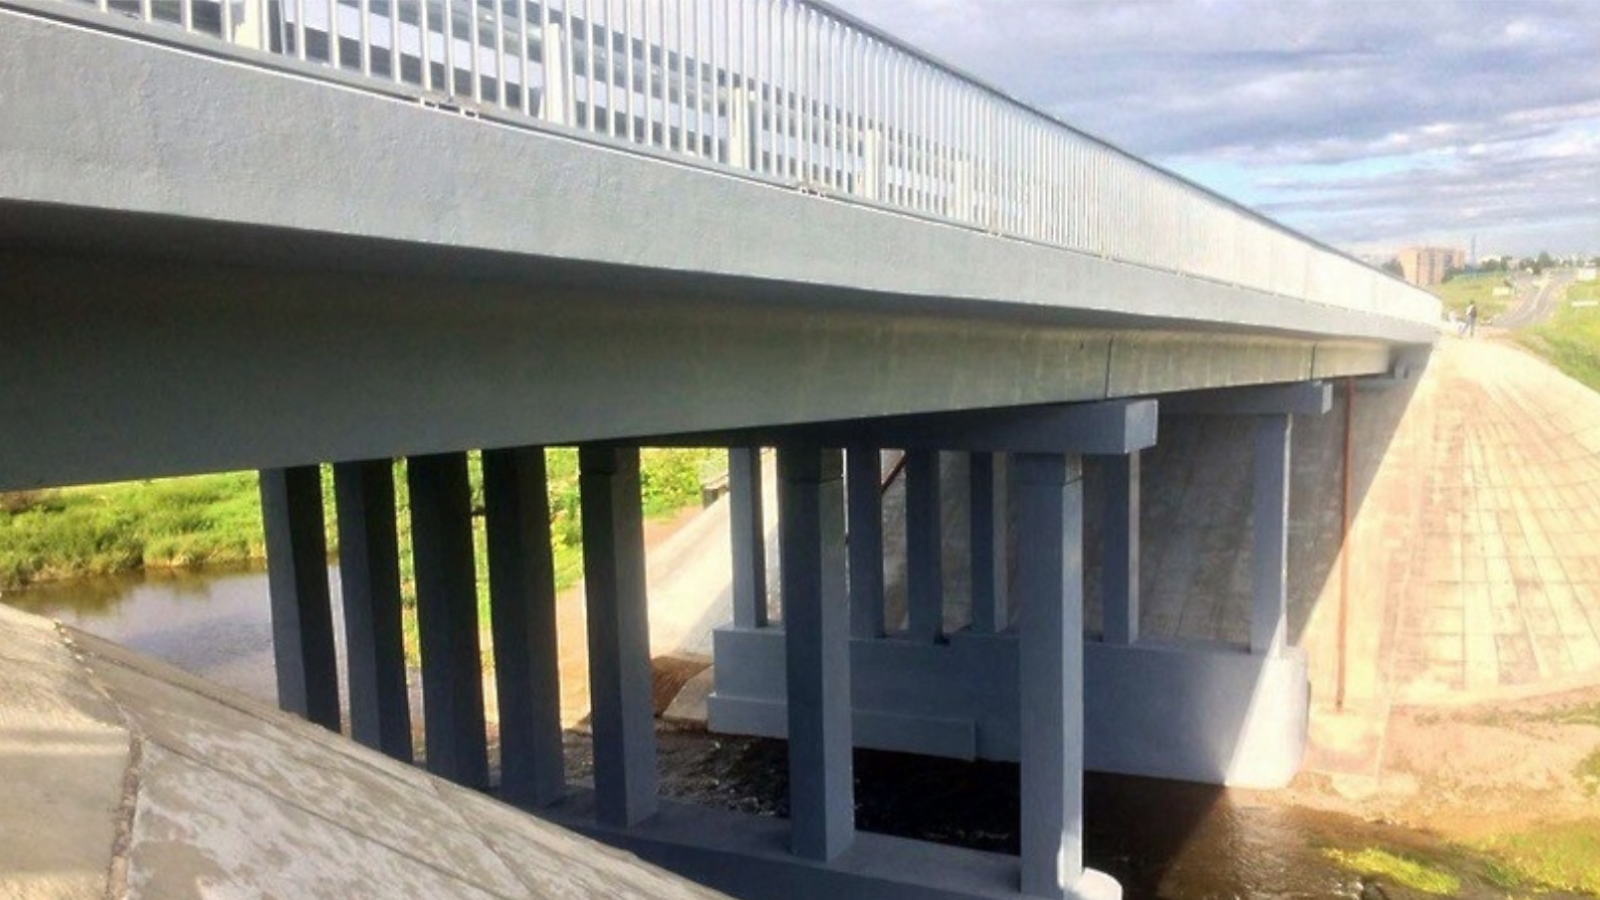 Yesterday, conditional Chuvashia lost 16 new good bridges and 882 repaired ones